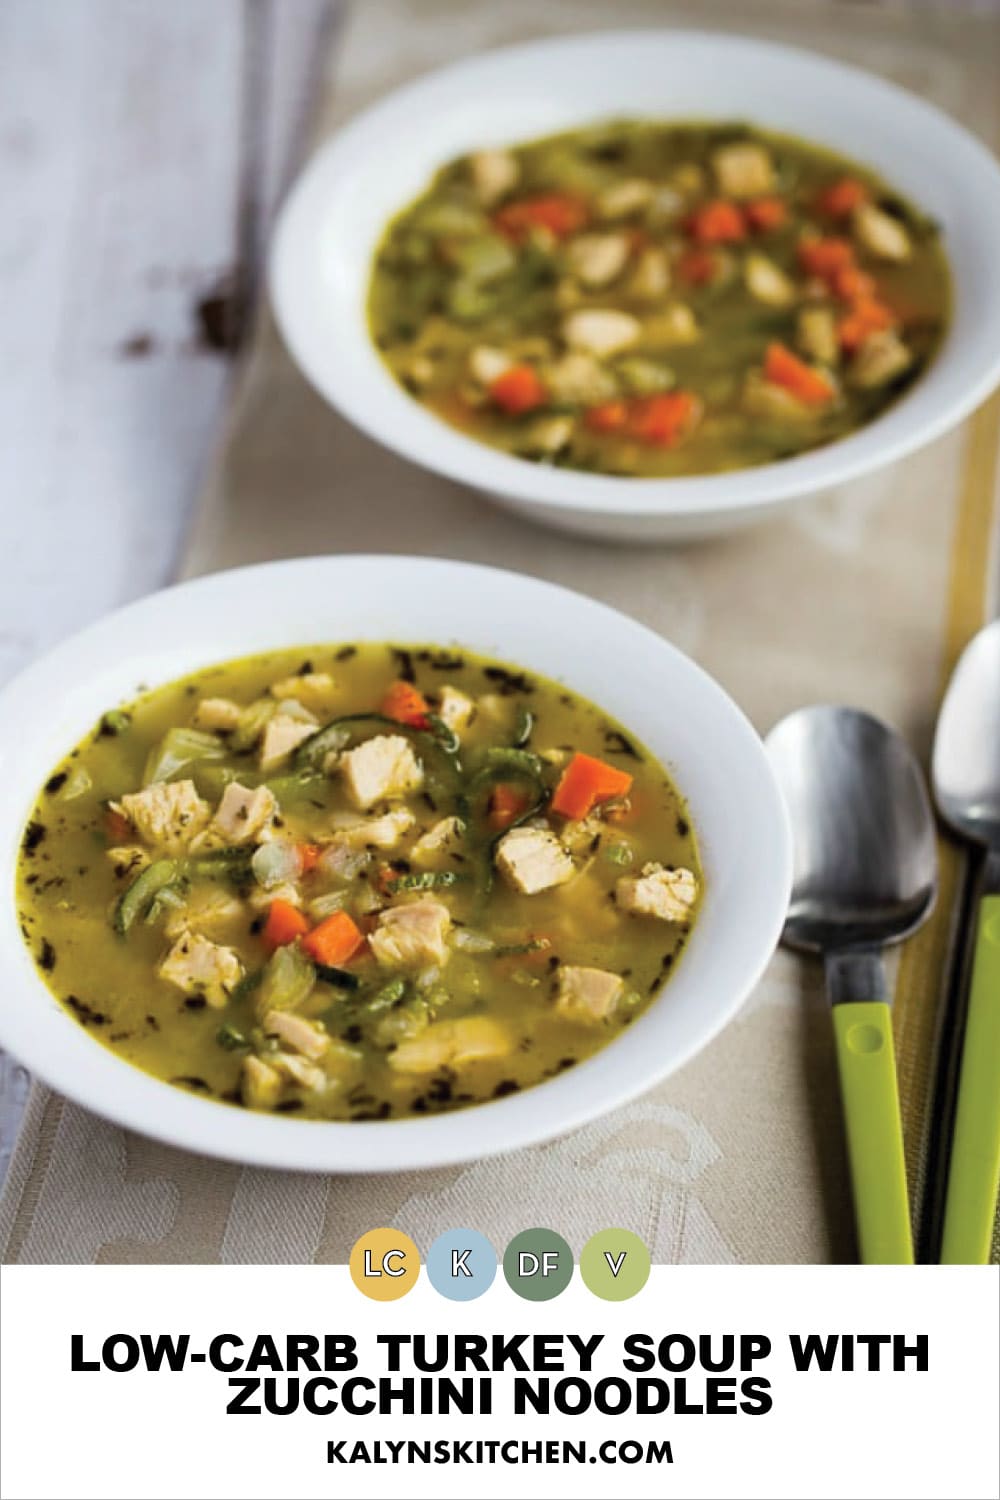 Pinterest image of Low-Carb Turkey Soup with Zucchini Noodles